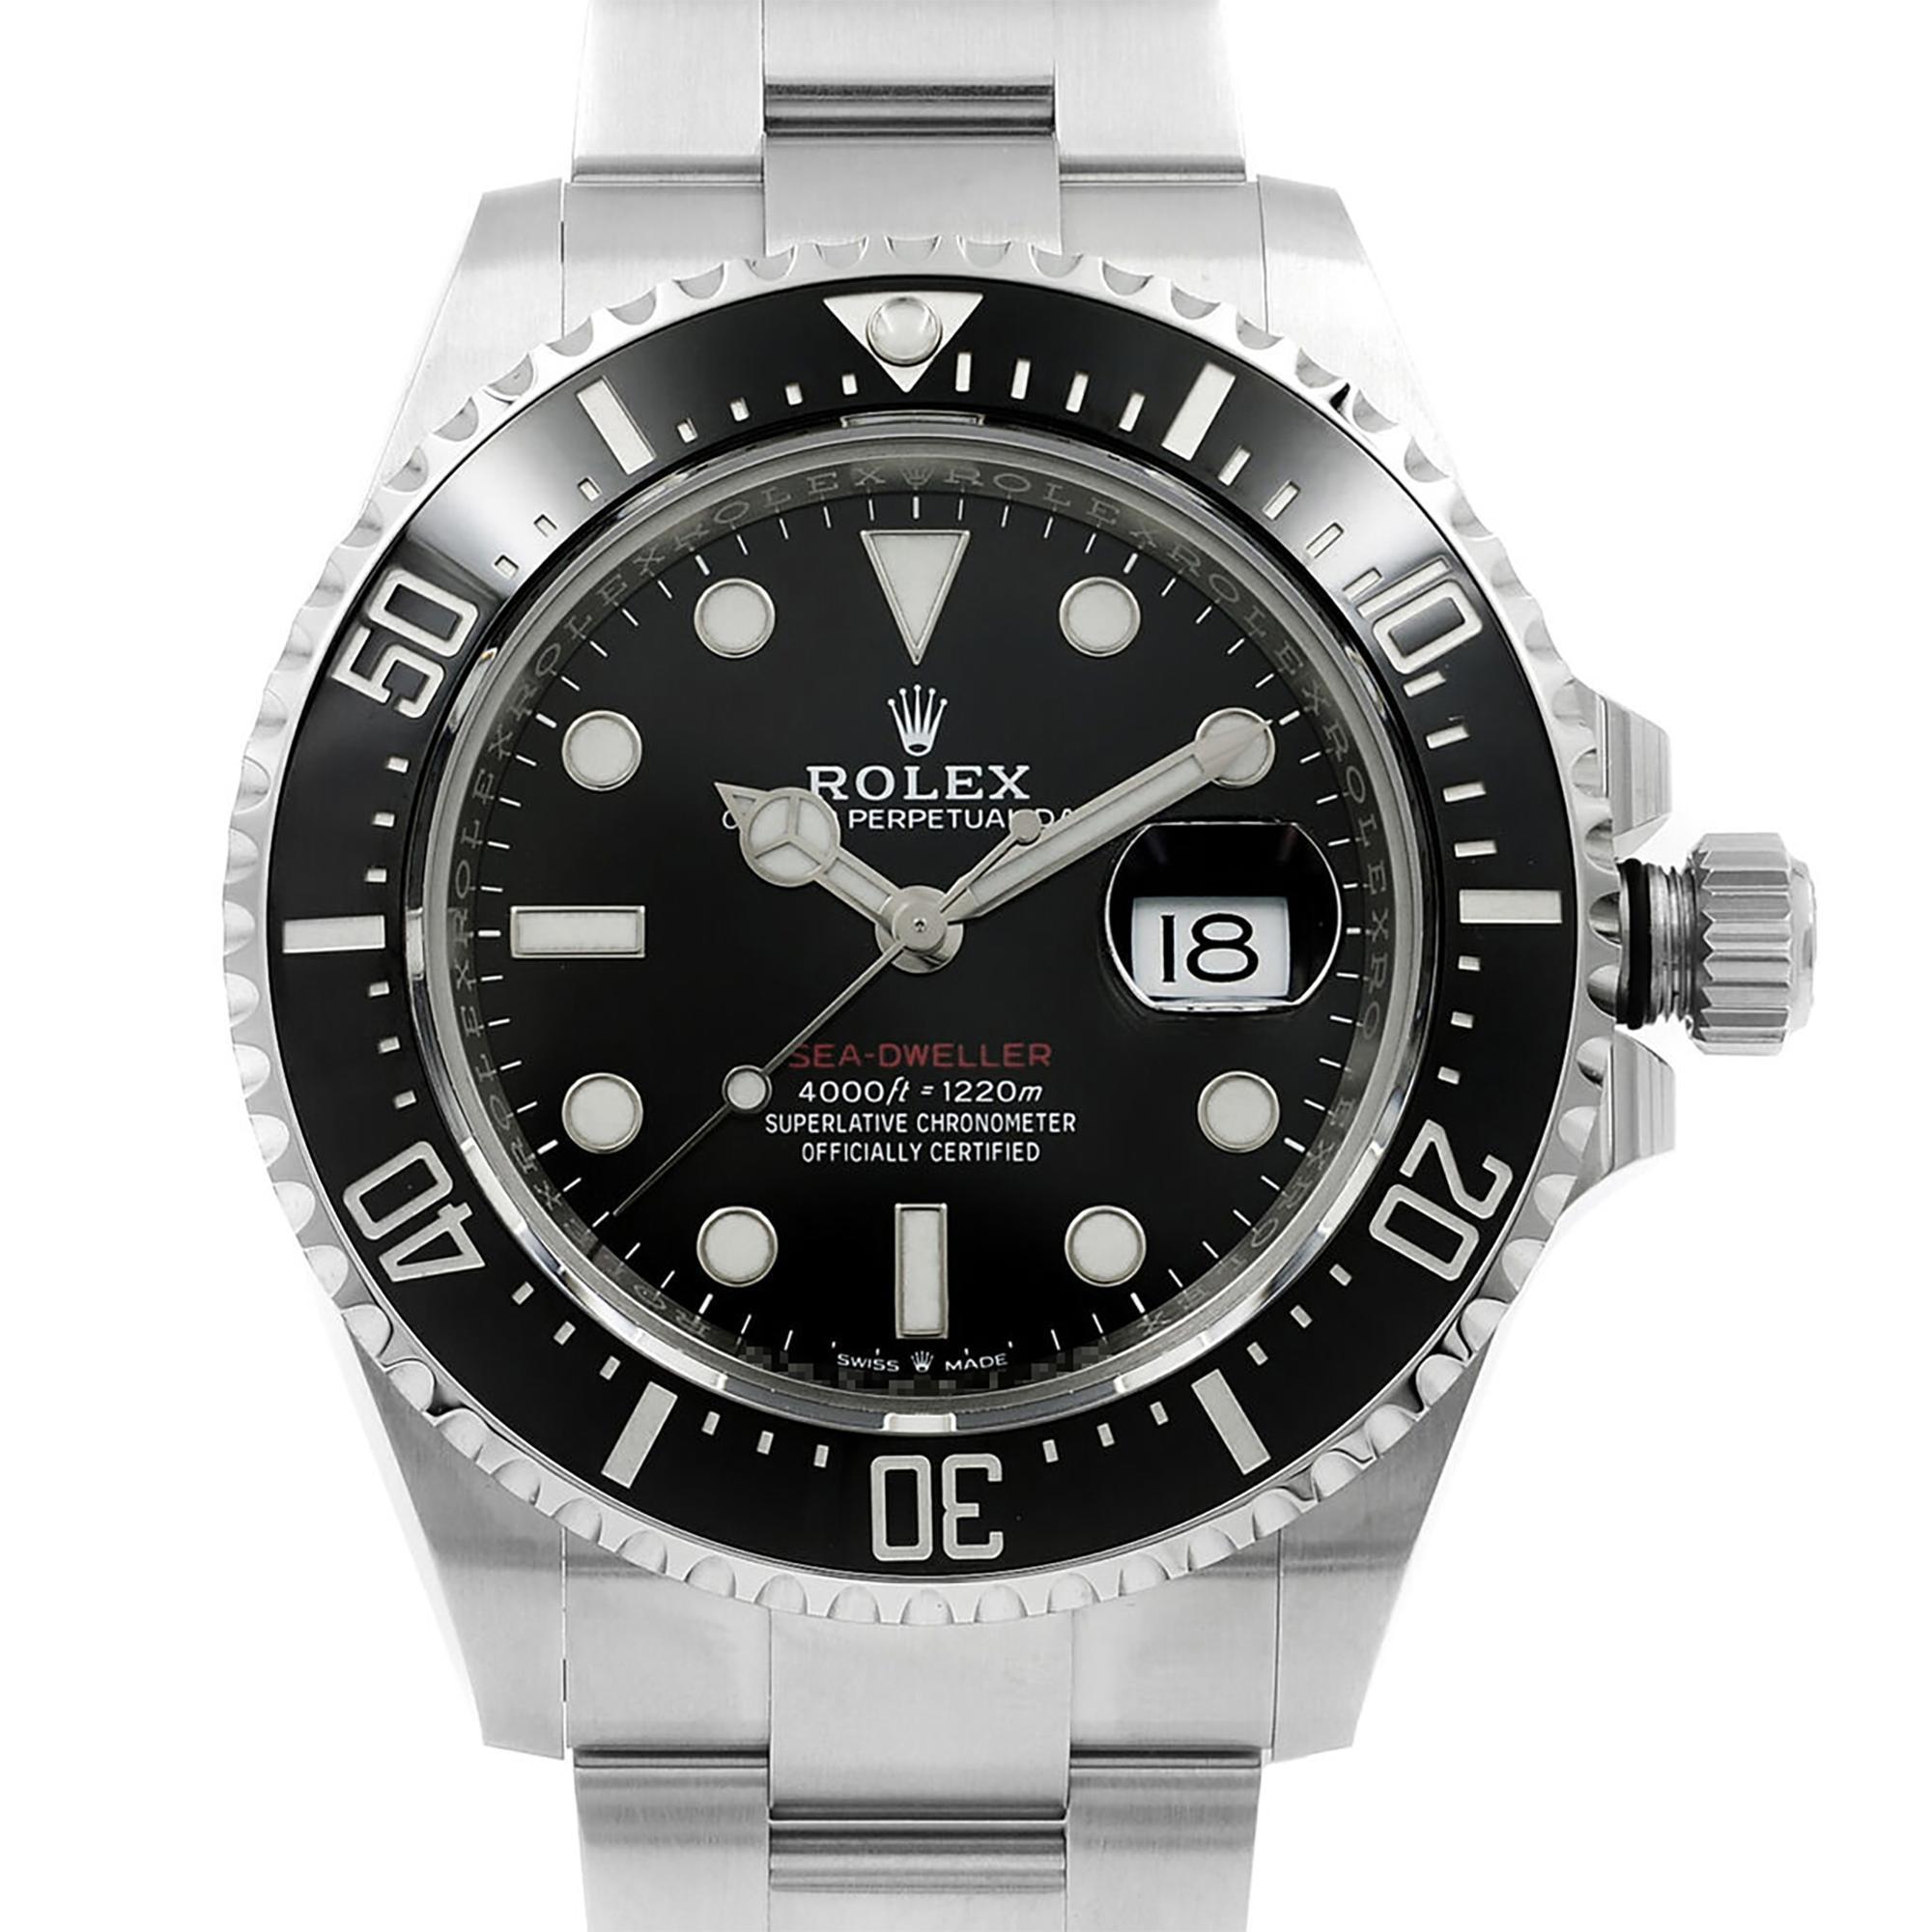 This Display model Rolex Sea-Dweller 126600 is a beautiful men's timepiece that is powered by a mechanical (automatic) movement and is cased in a stainless steel case. It has a round shape face, date indicator dial, and sticks and dots style hour